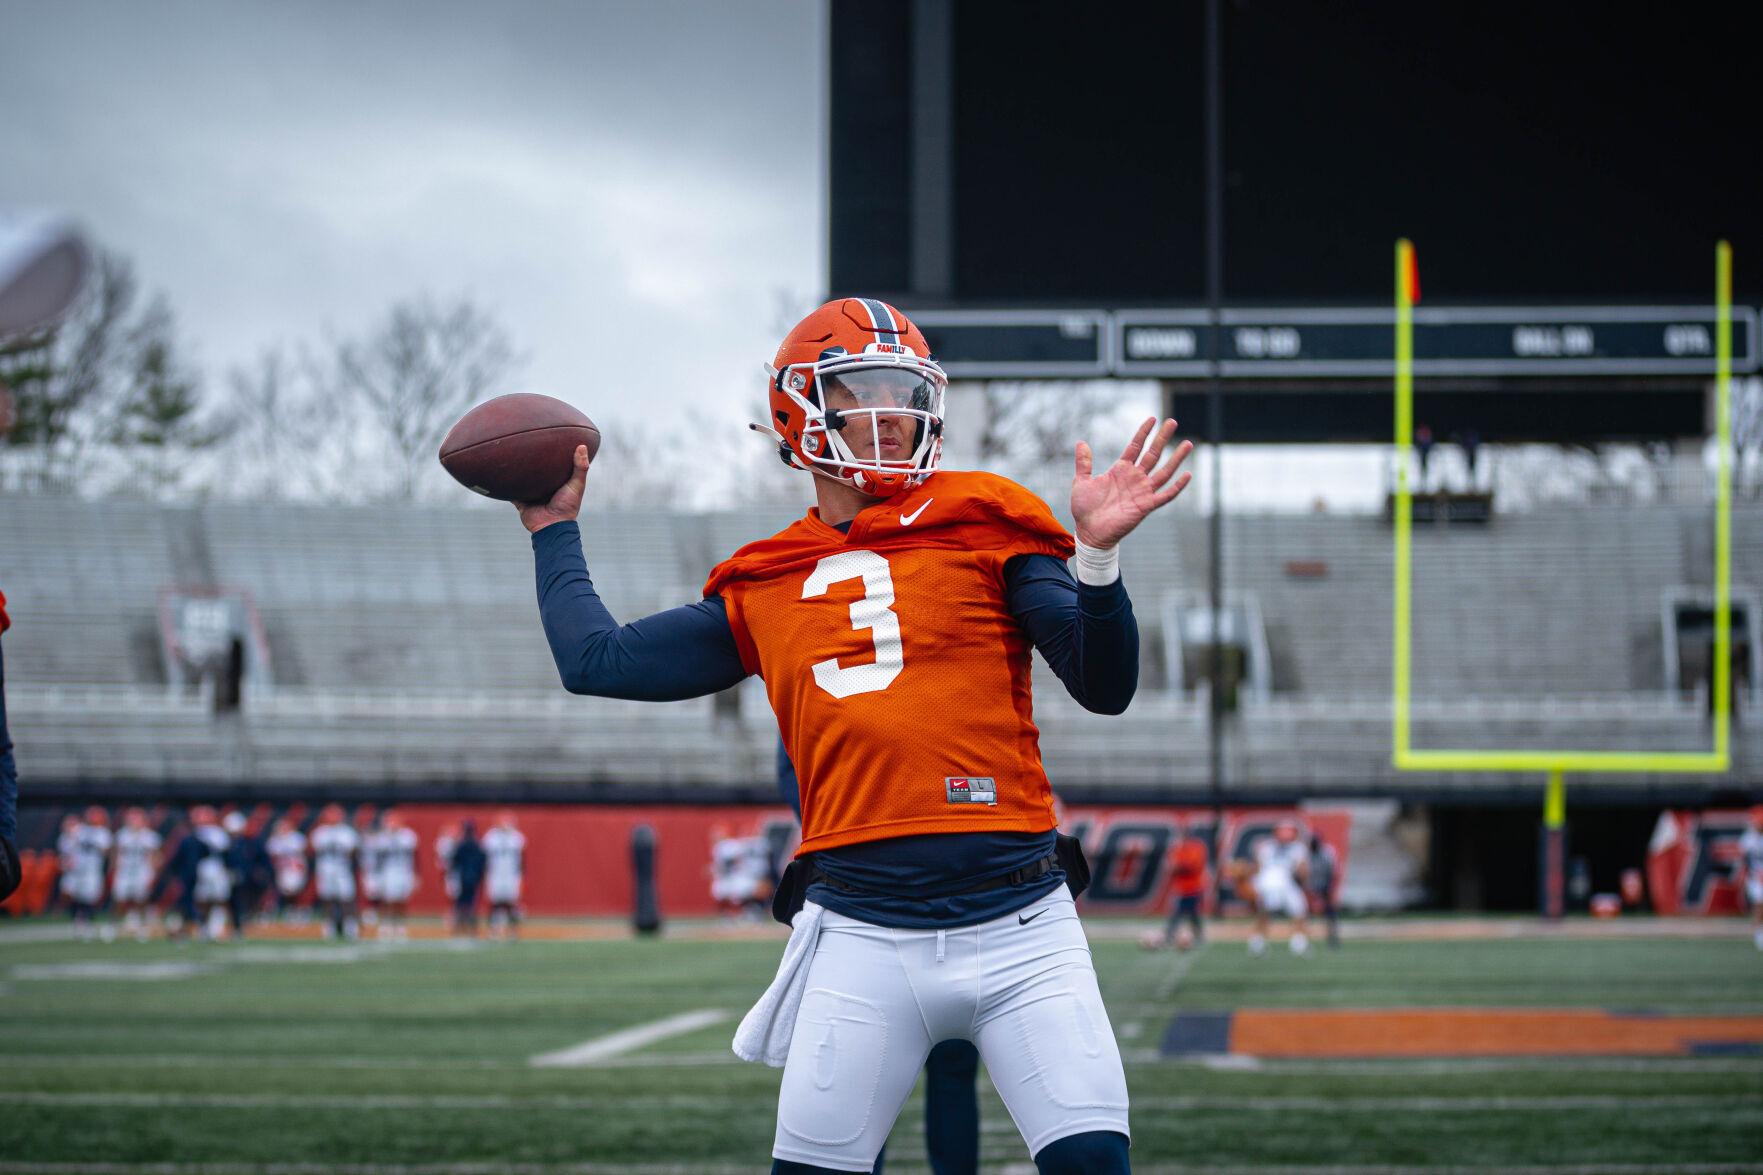 Illinois quarterback Tommy DeVito playing while mourning loss of